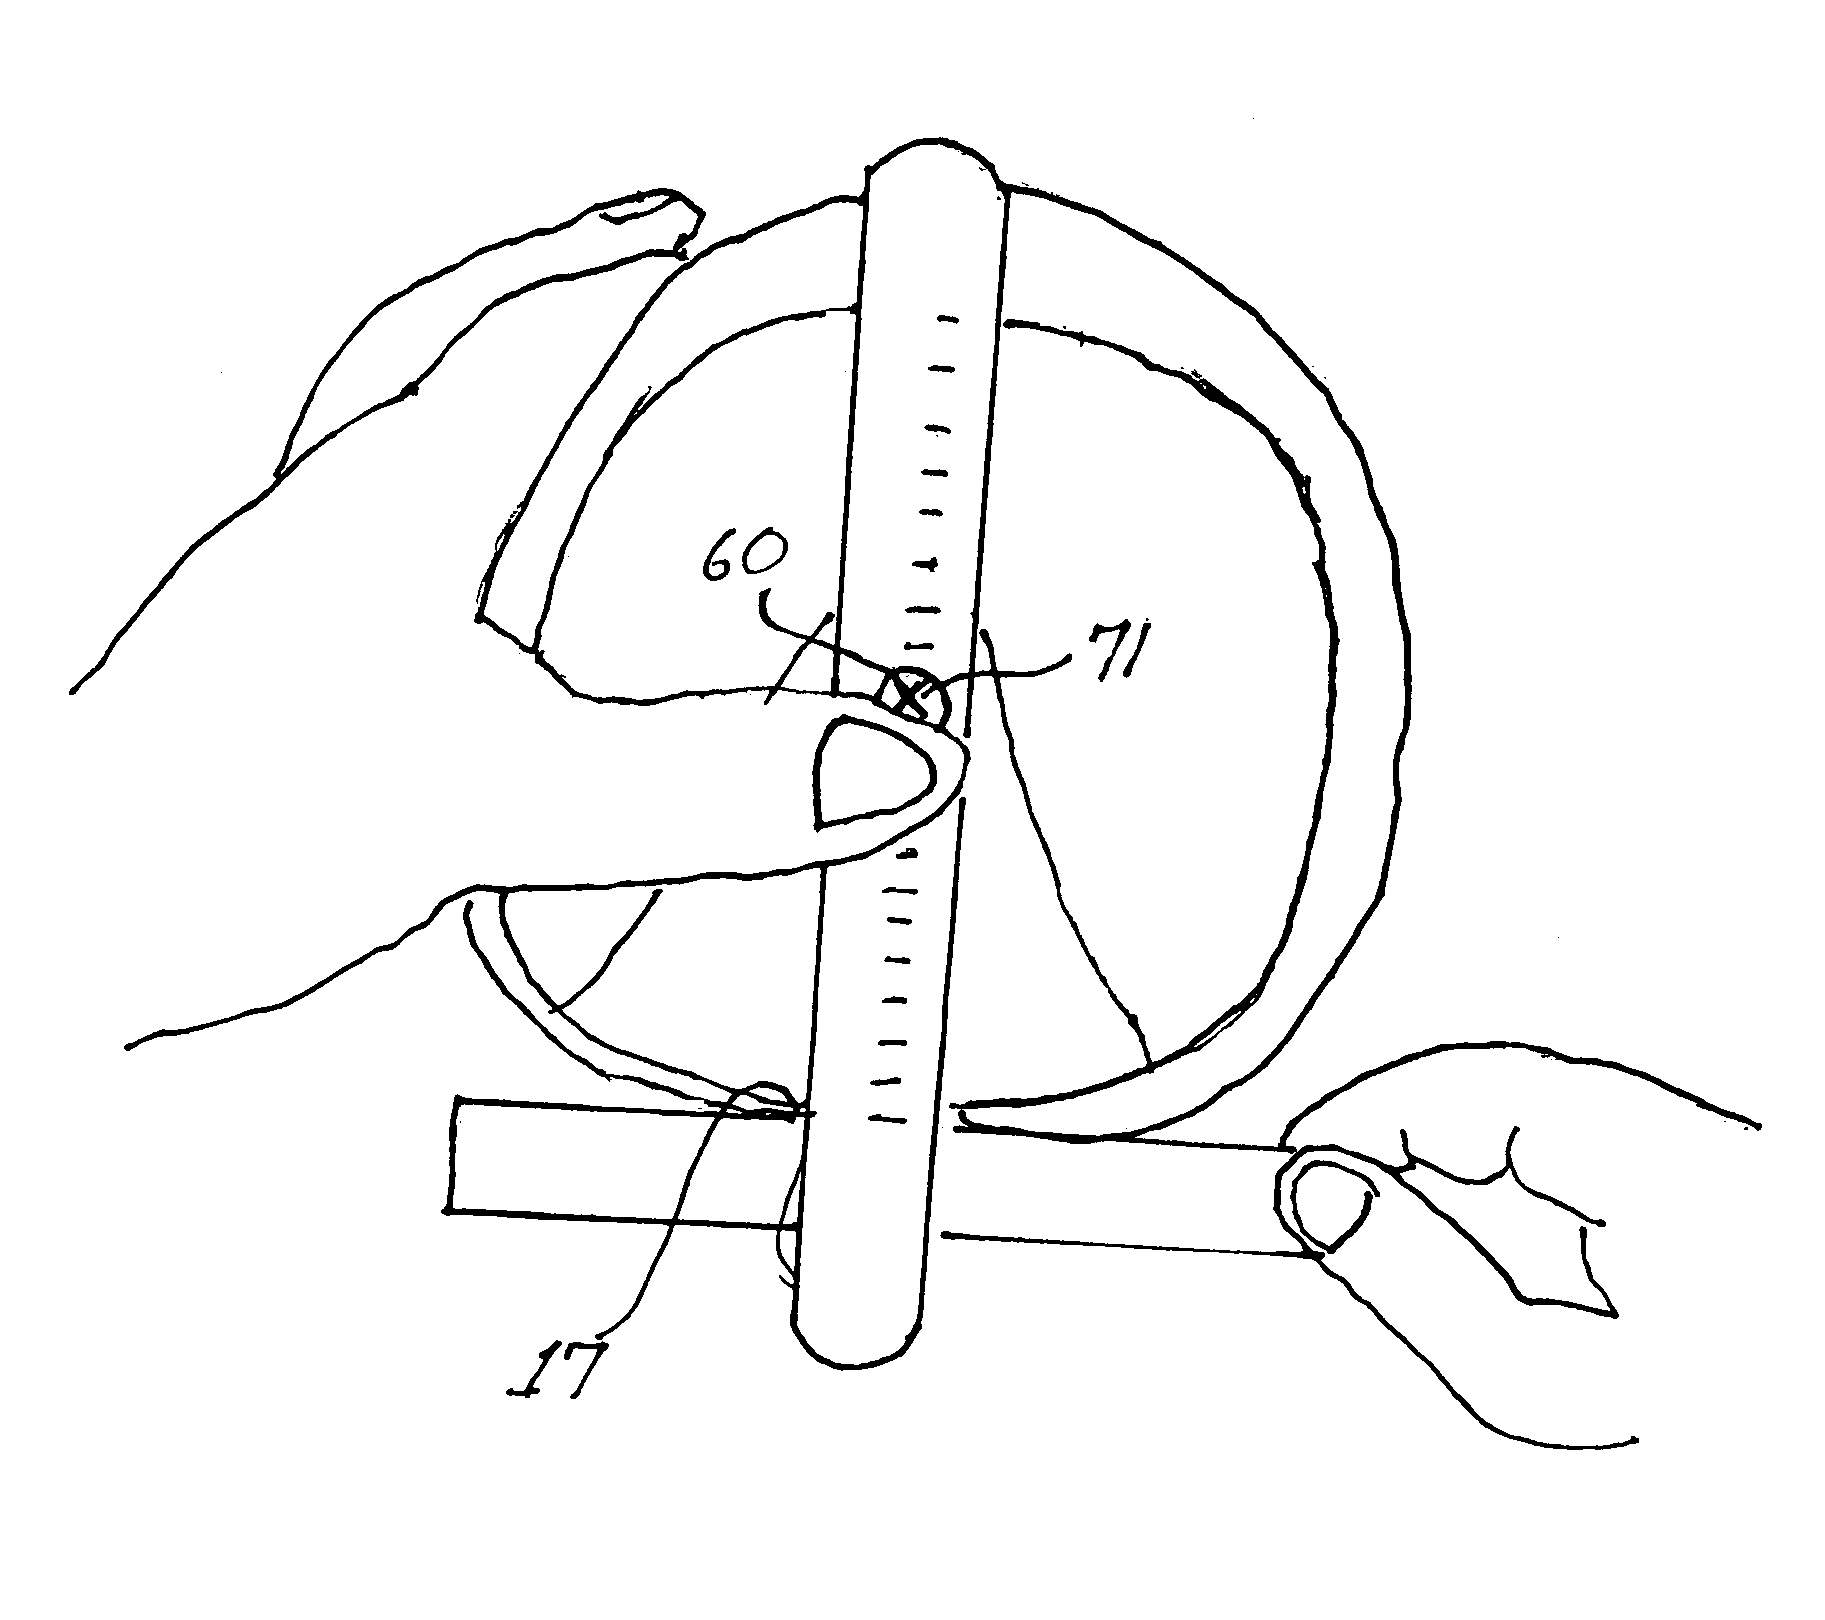 Farrier's measuring tool and method for using